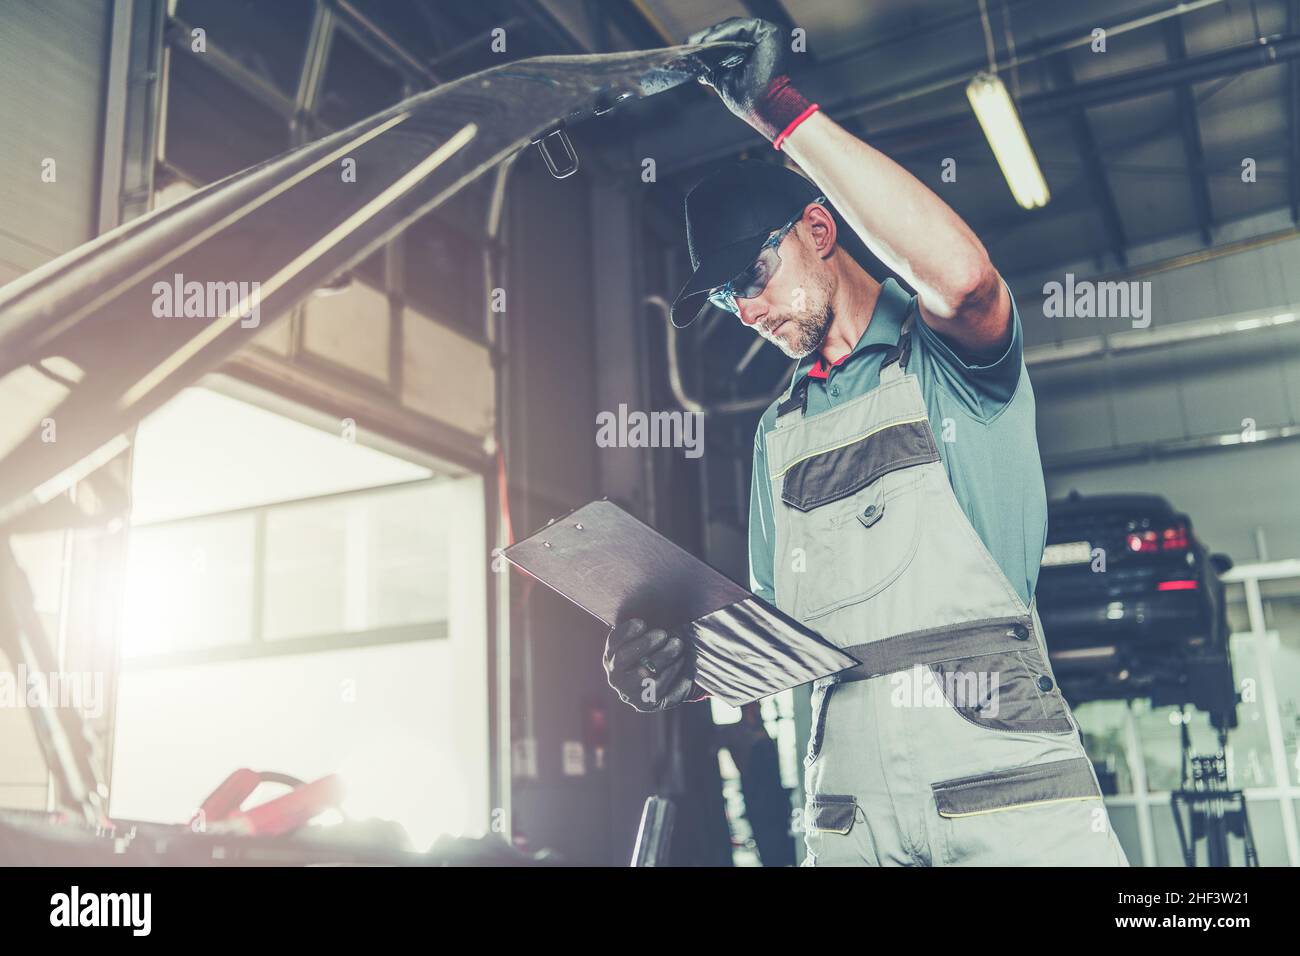 Caucasian Car Mechanic Electronic Elements Technician Checking on an Issue with a Vehicle Looking Under Its Hood. Automotive Service Industry. Stock Photo